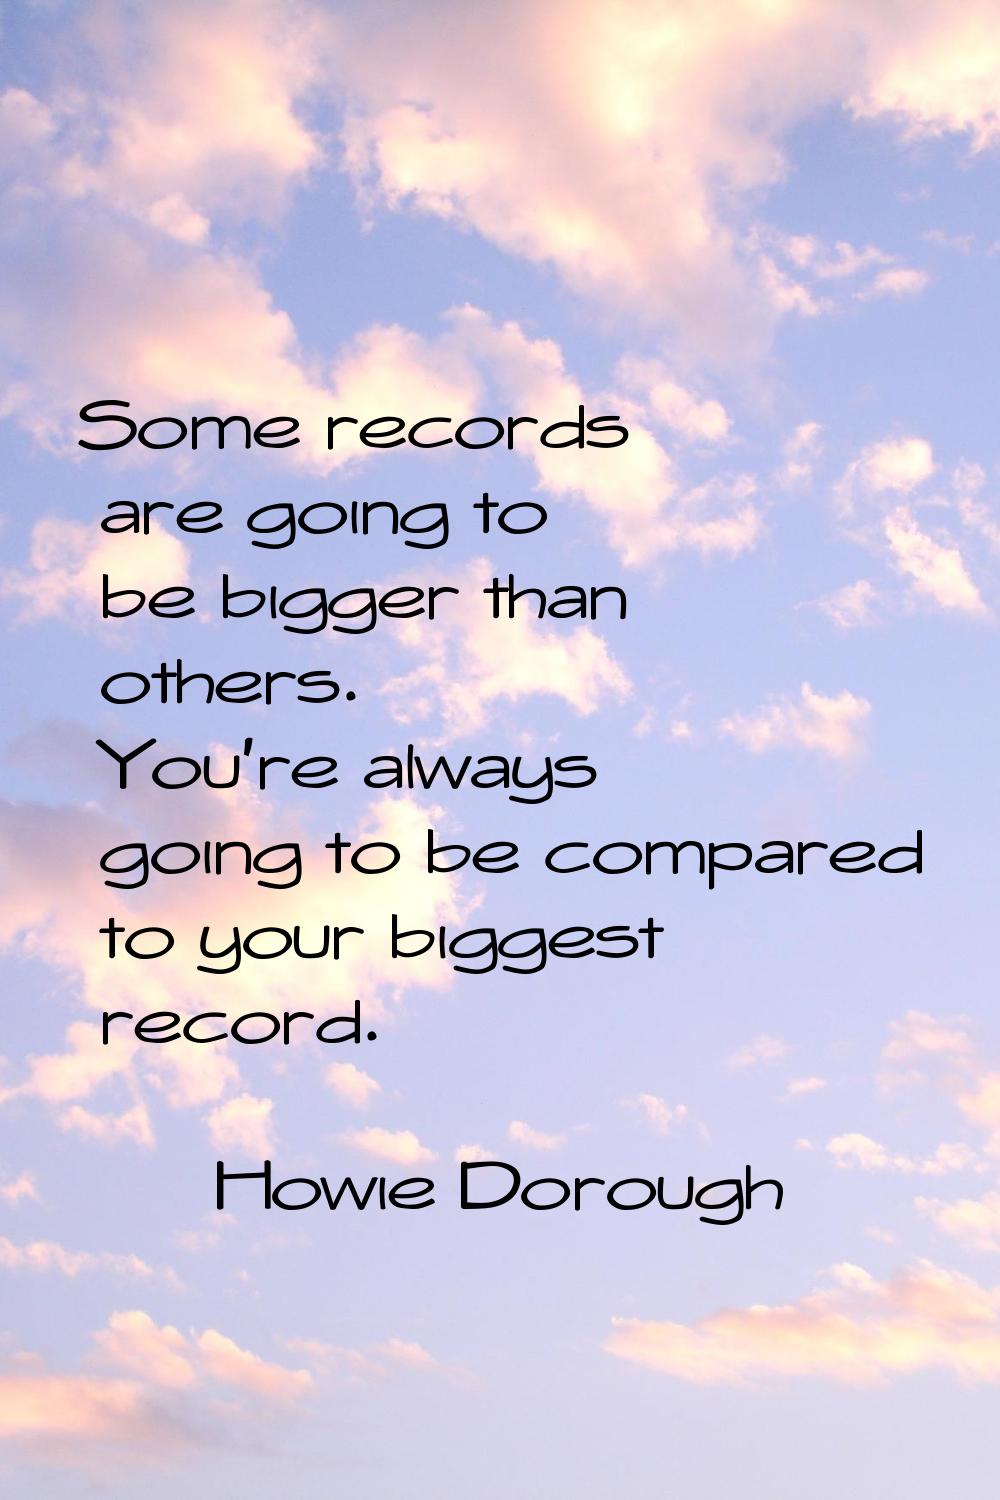 Some records are going to be bigger than others. You're always going to be compared to your biggest